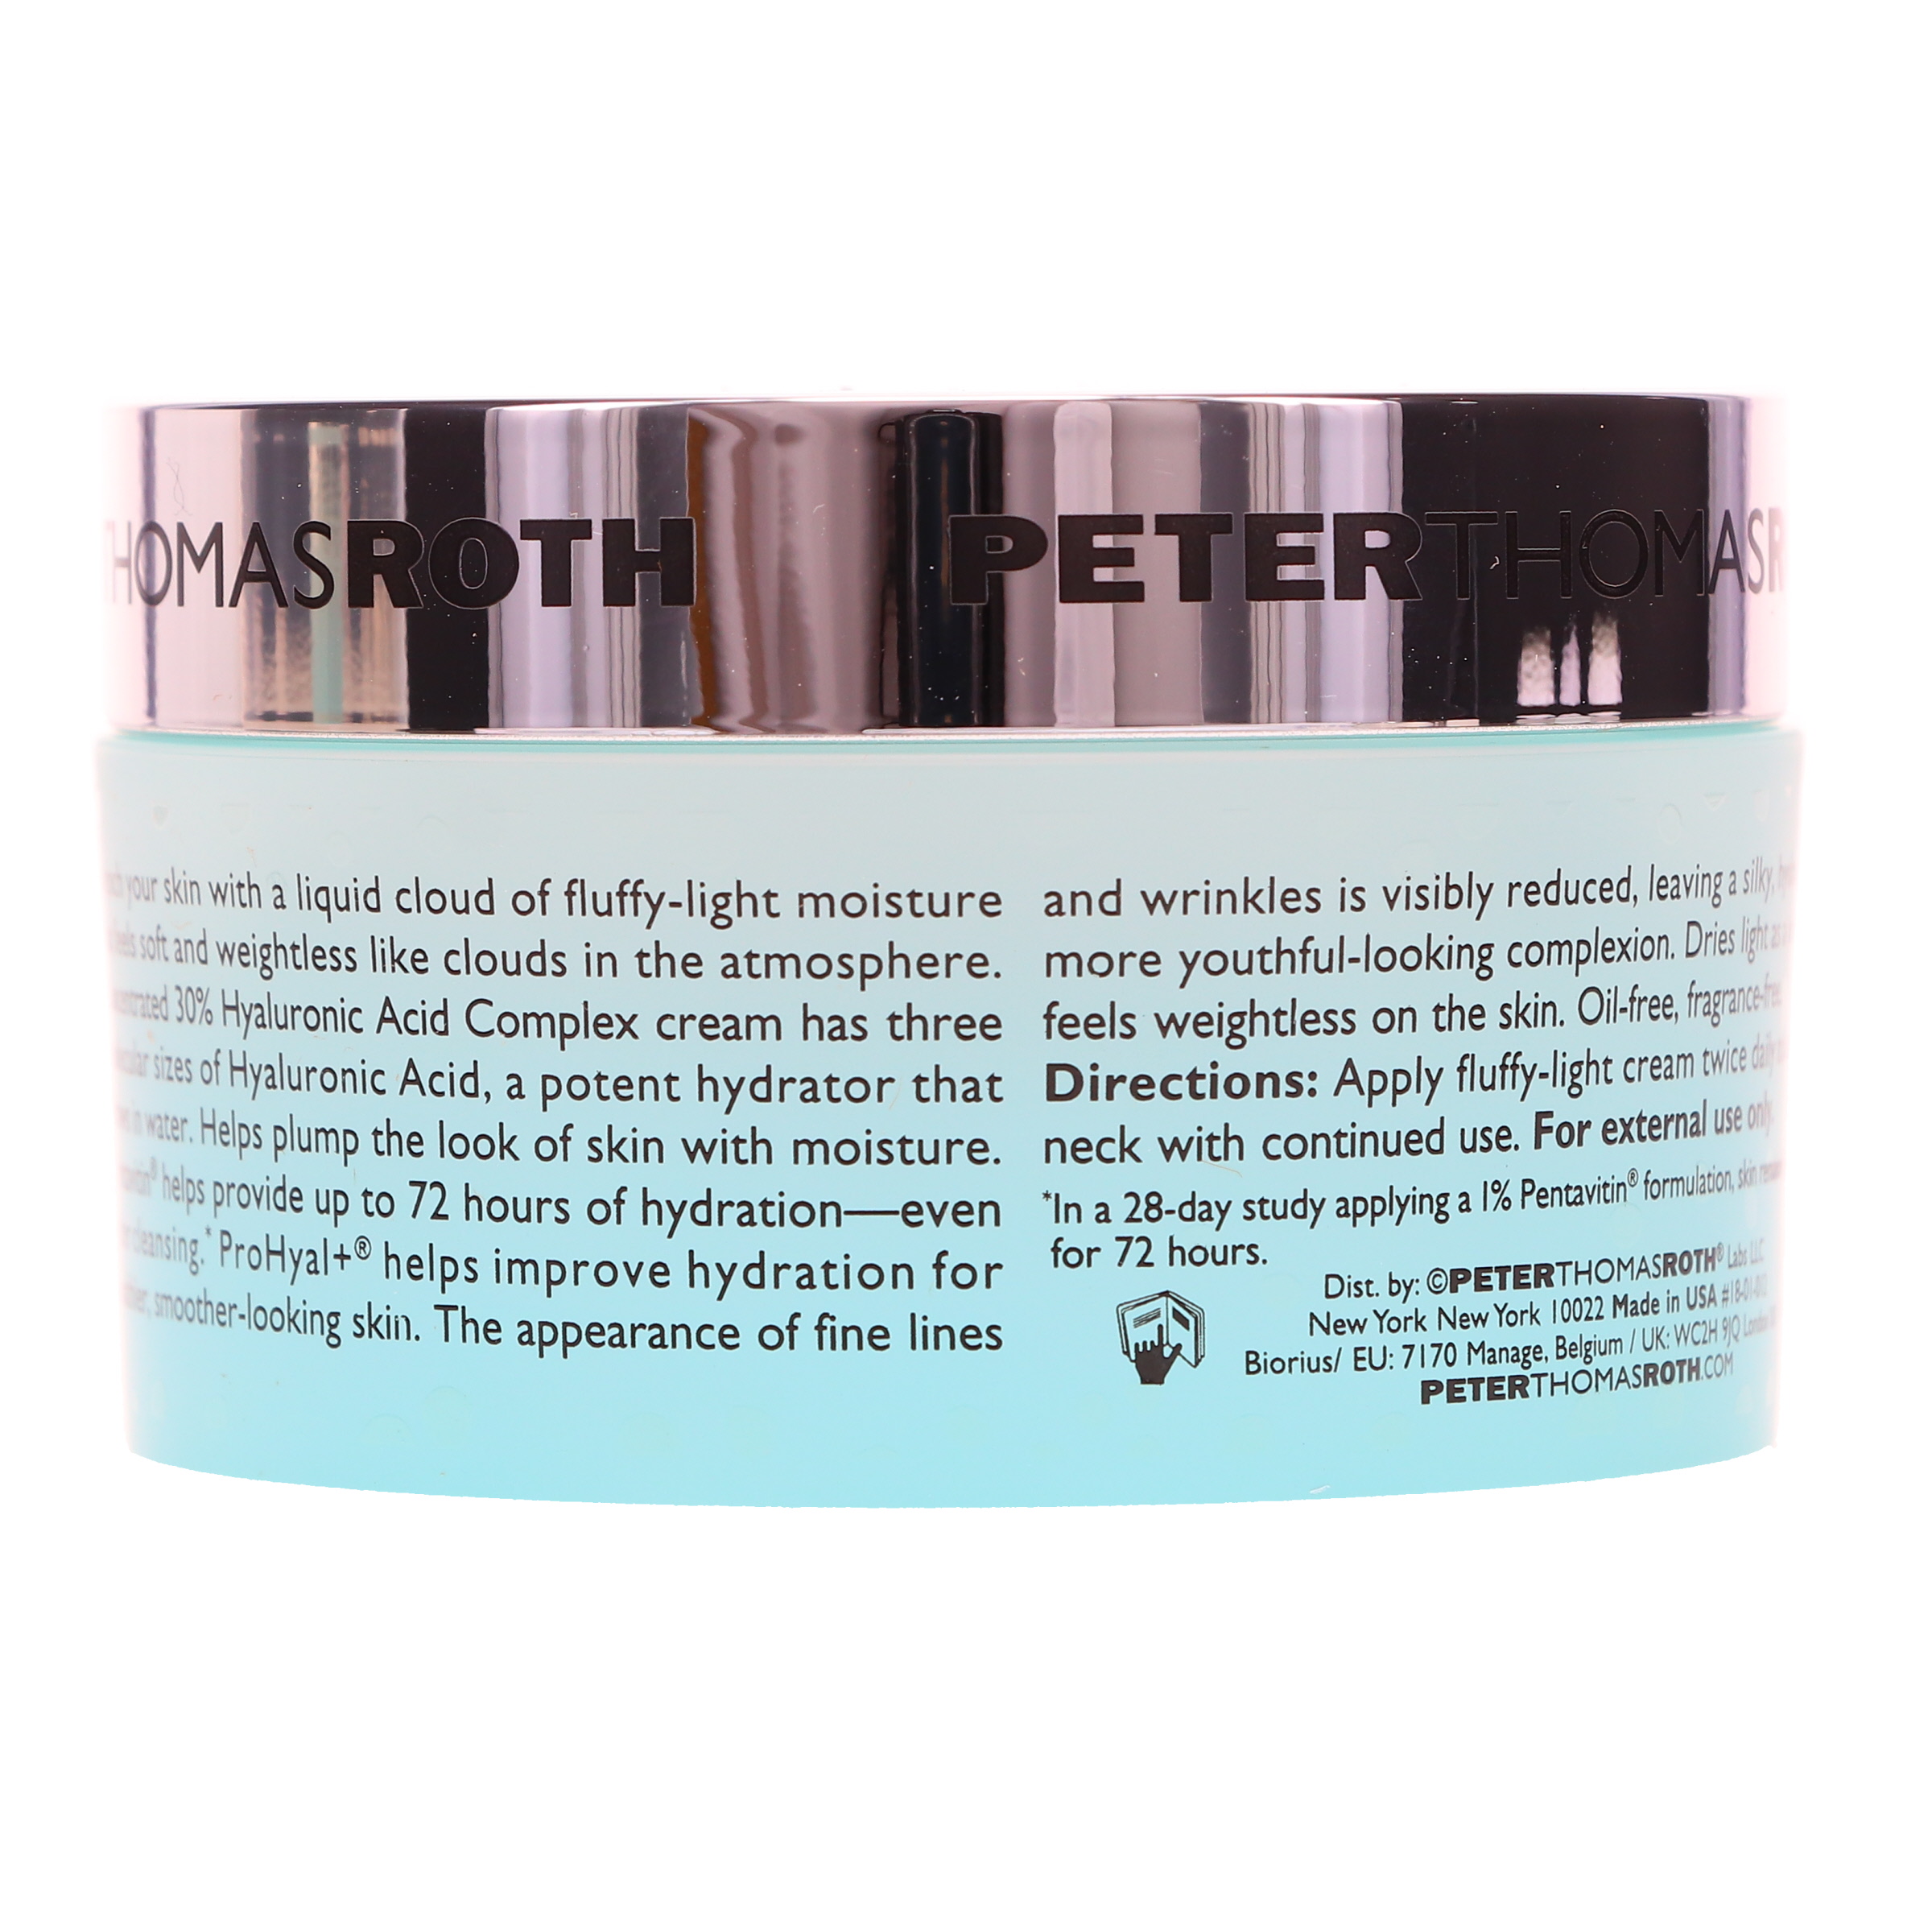 Water Drench Hyaluronic Cloud Cream - image 4 of 8